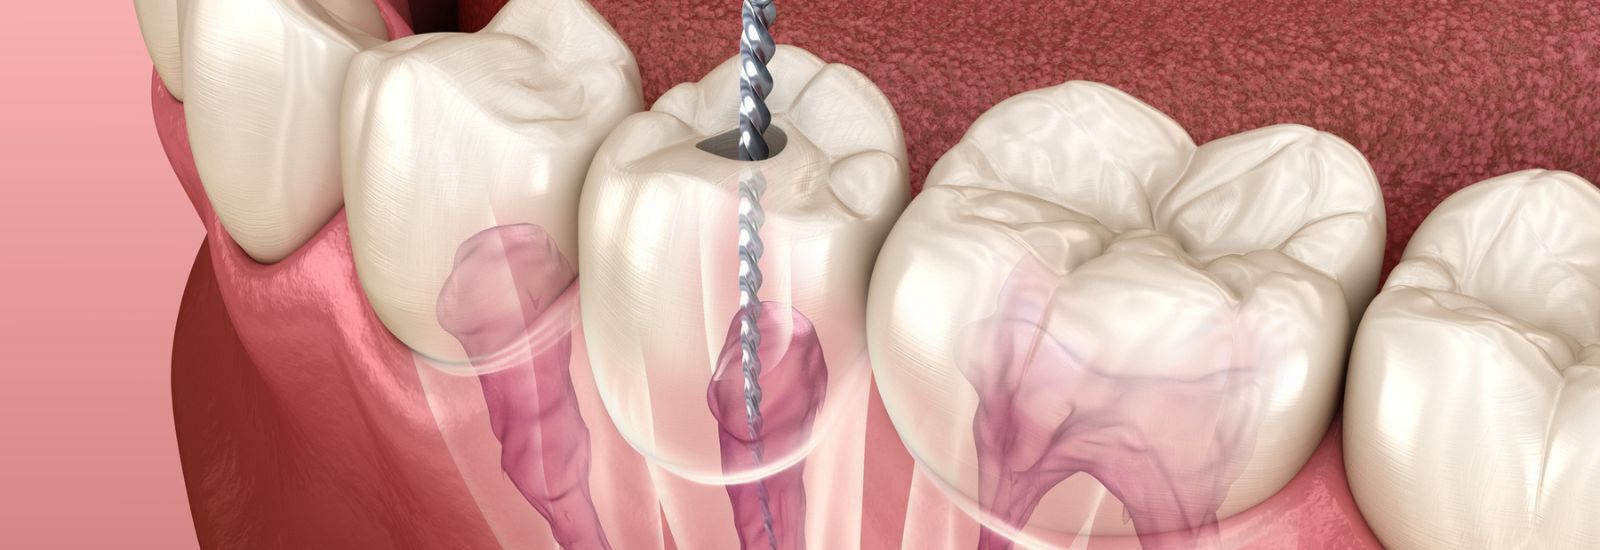 Root canals